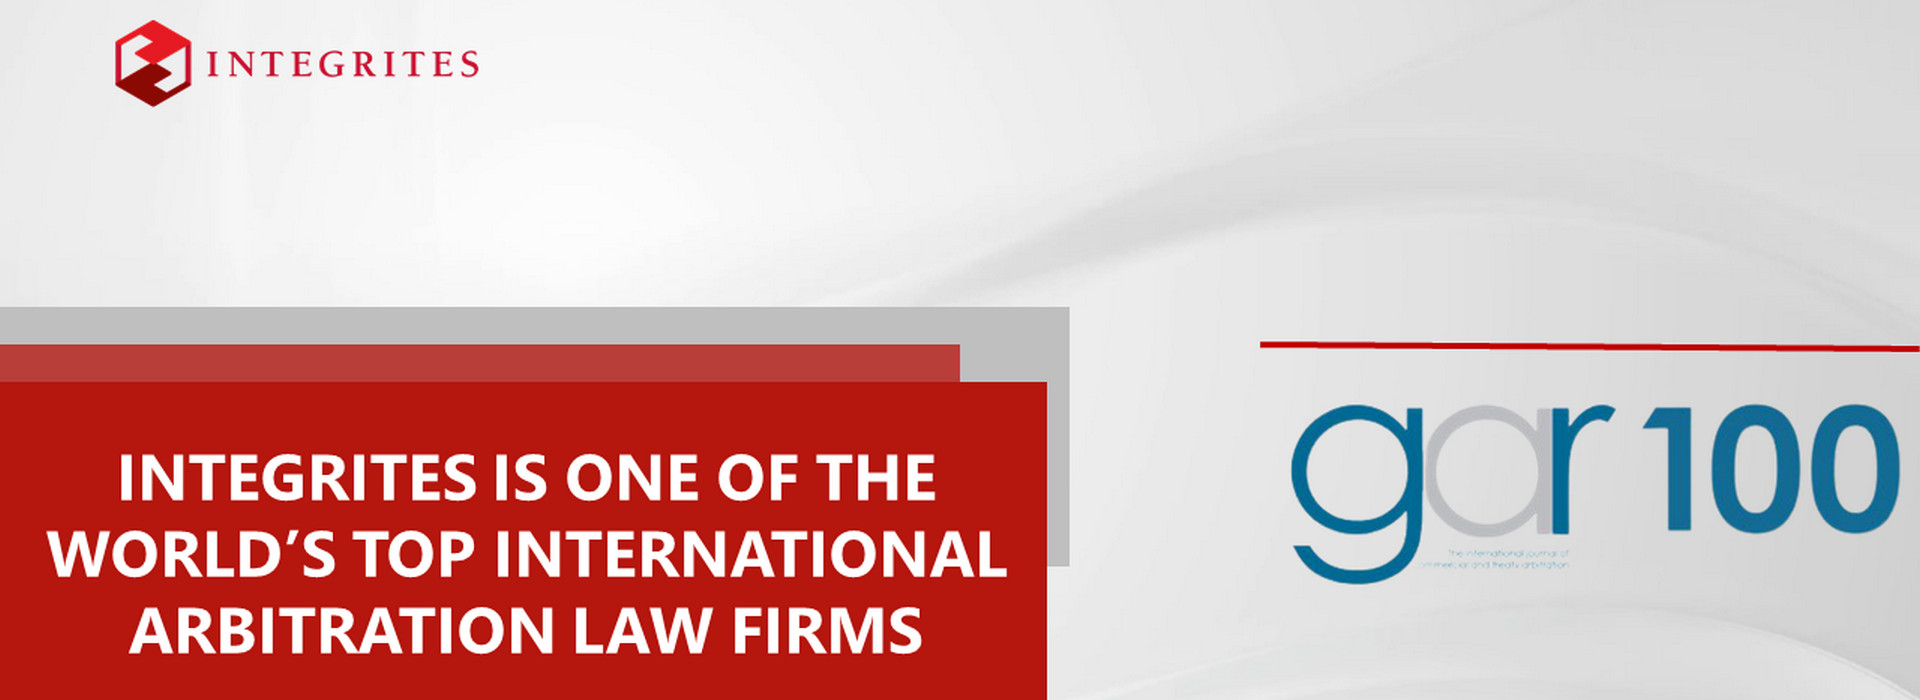 INTEGRITES Is Among the World’s Top Law Firms in Arbitration According to GAR100 in 2021